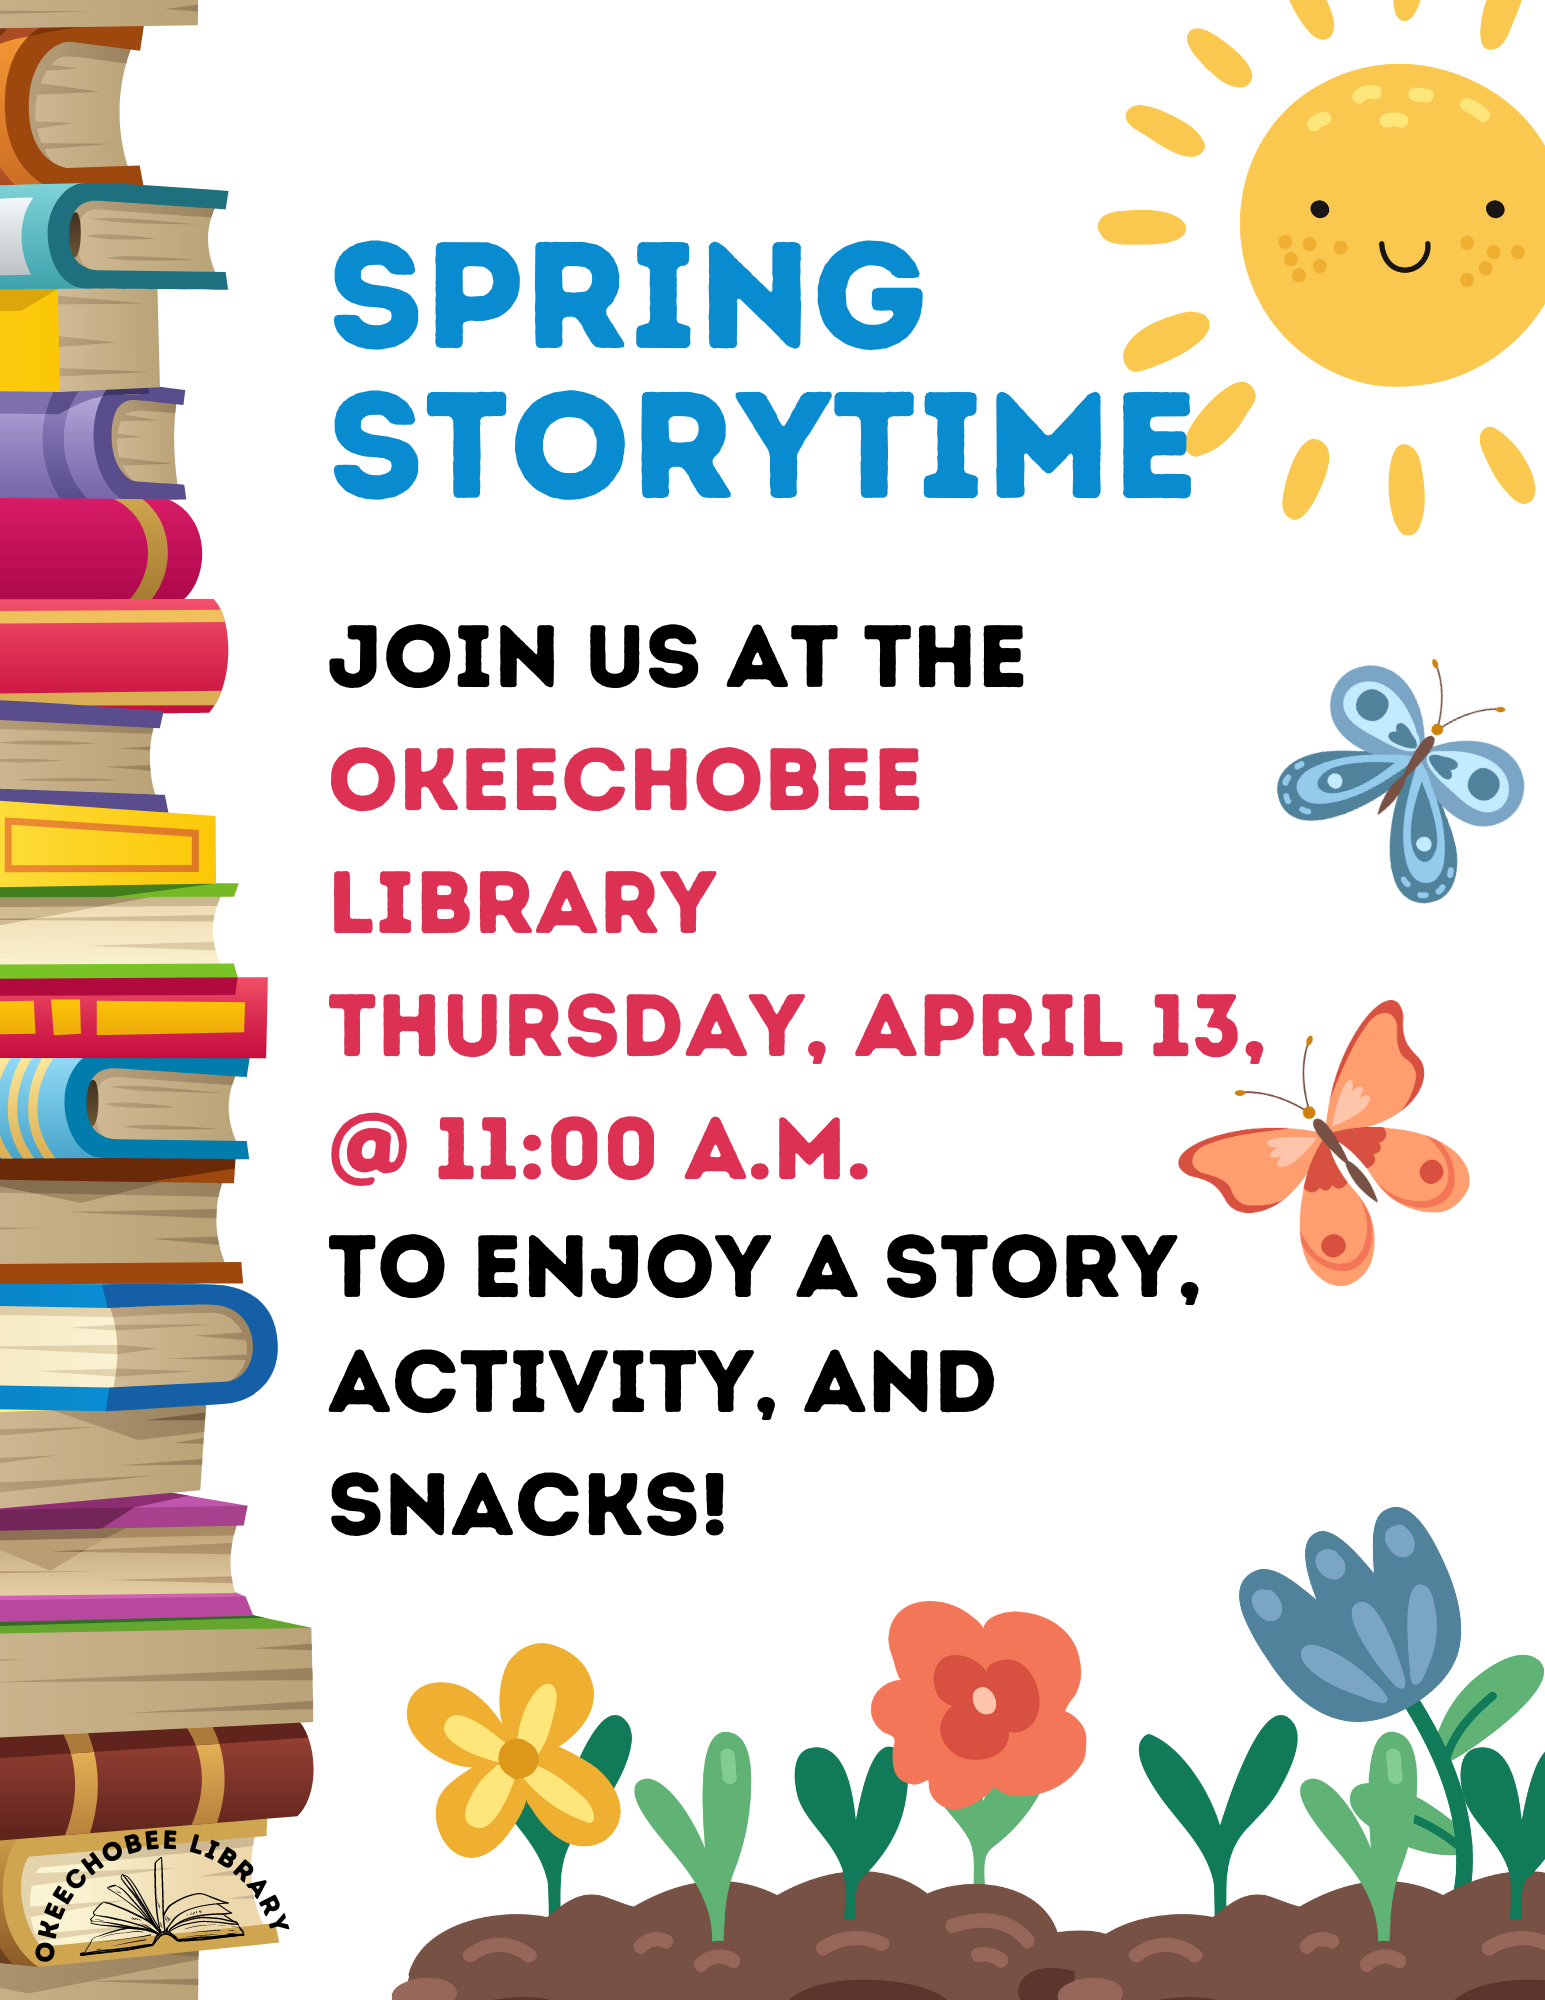 Join us at the Okeechobee Library on April 13th at 11:00 A.M. for our Spring Story Time!